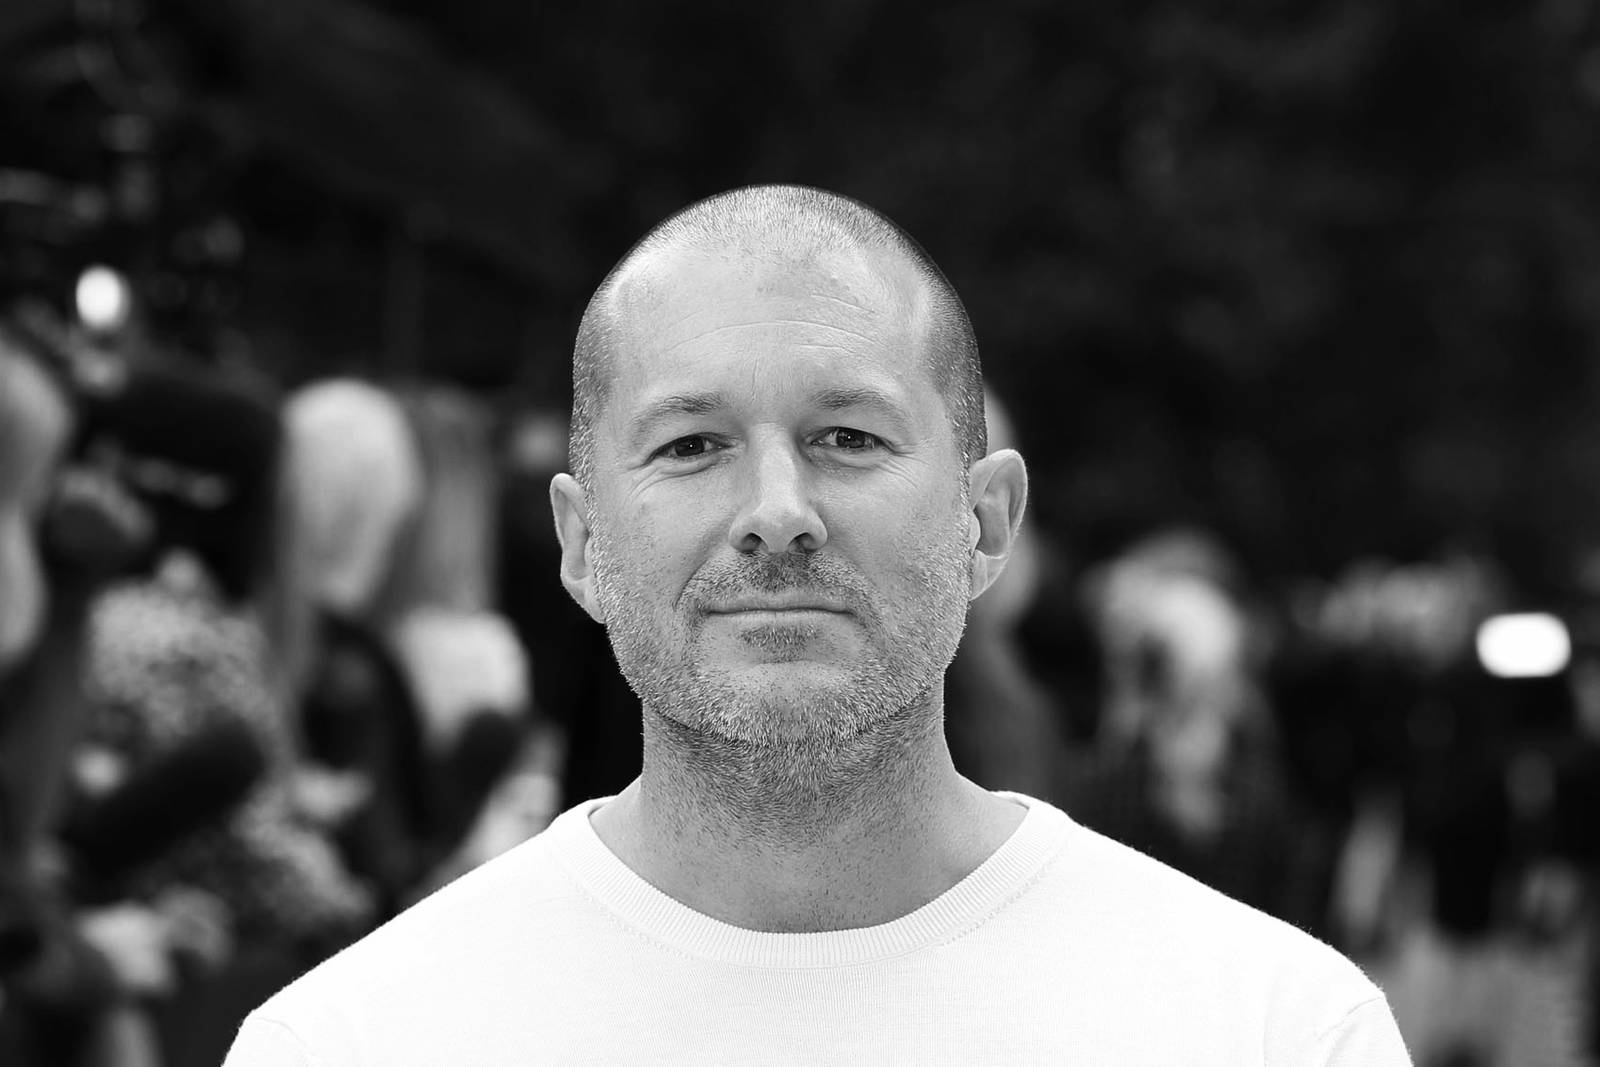 jony ive tell what he think of developing iphone